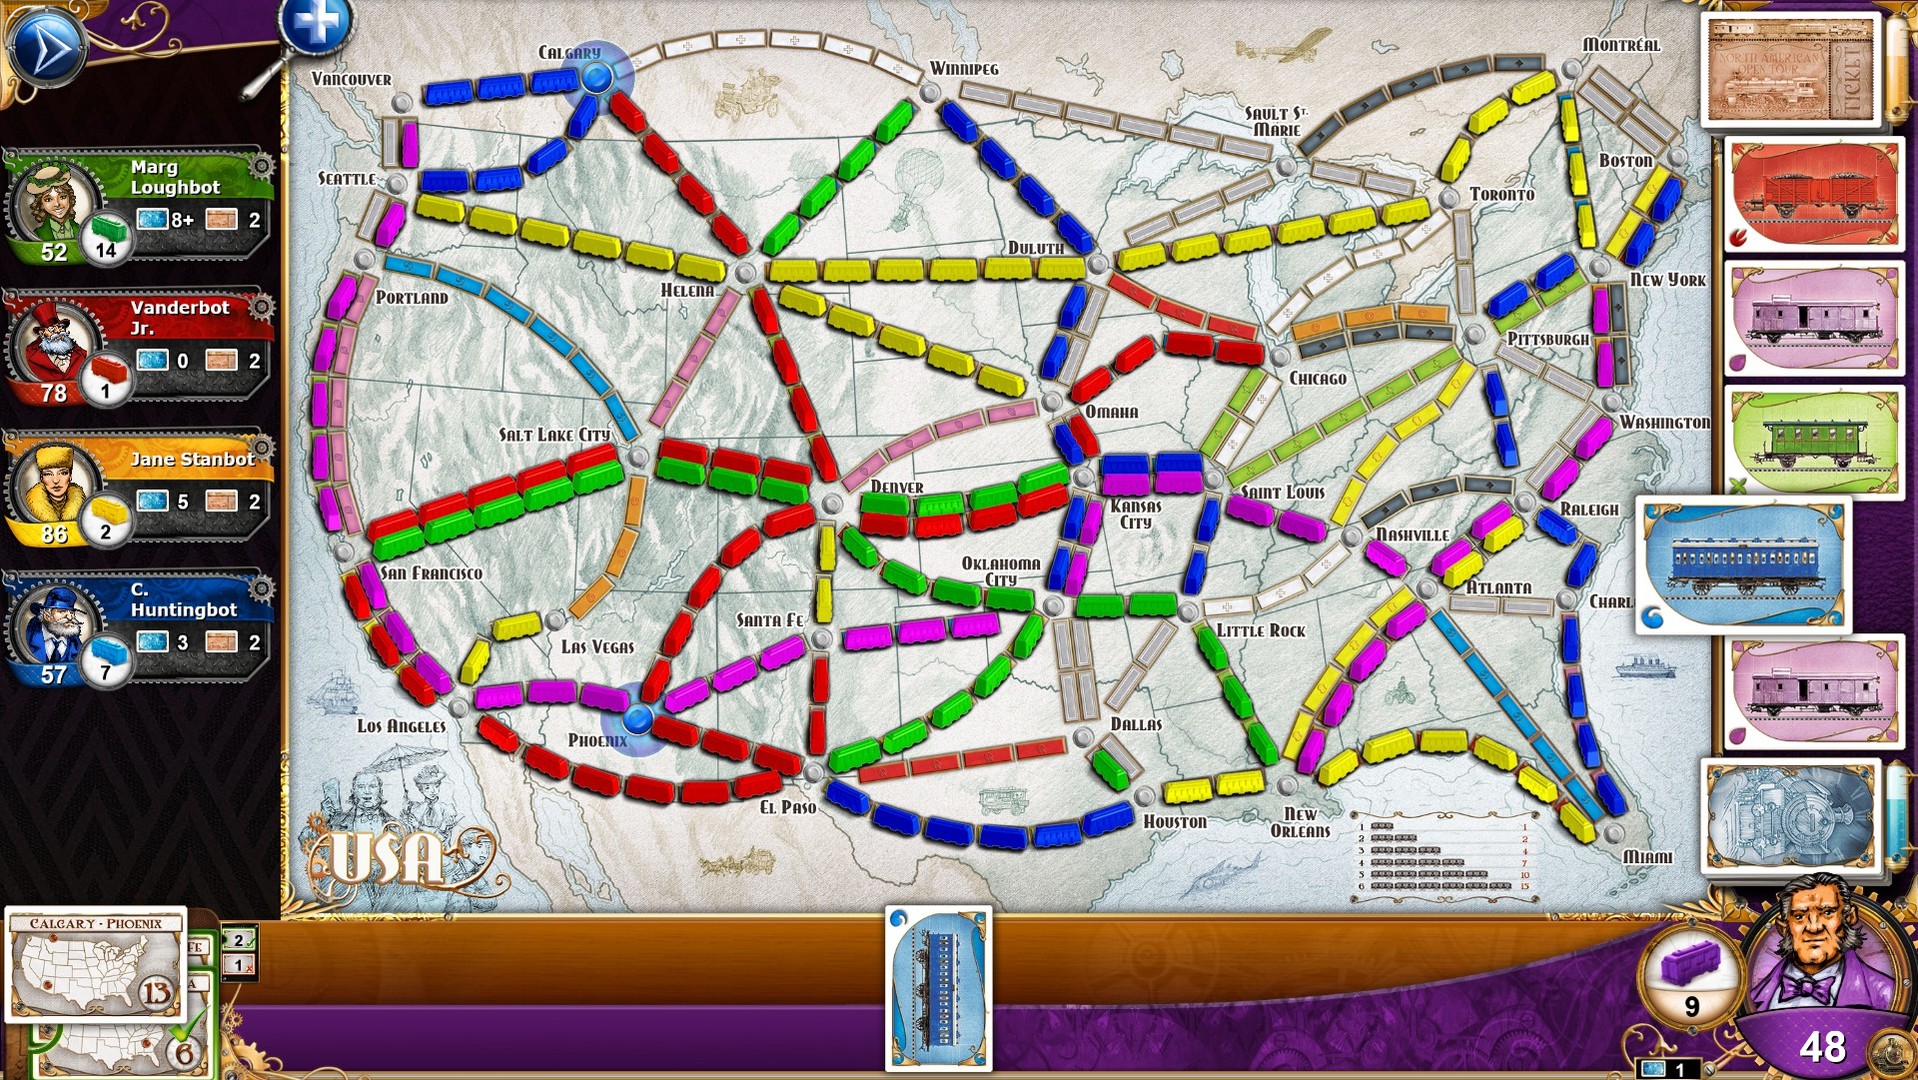 Save 50% on Ticket to Ride on Steam